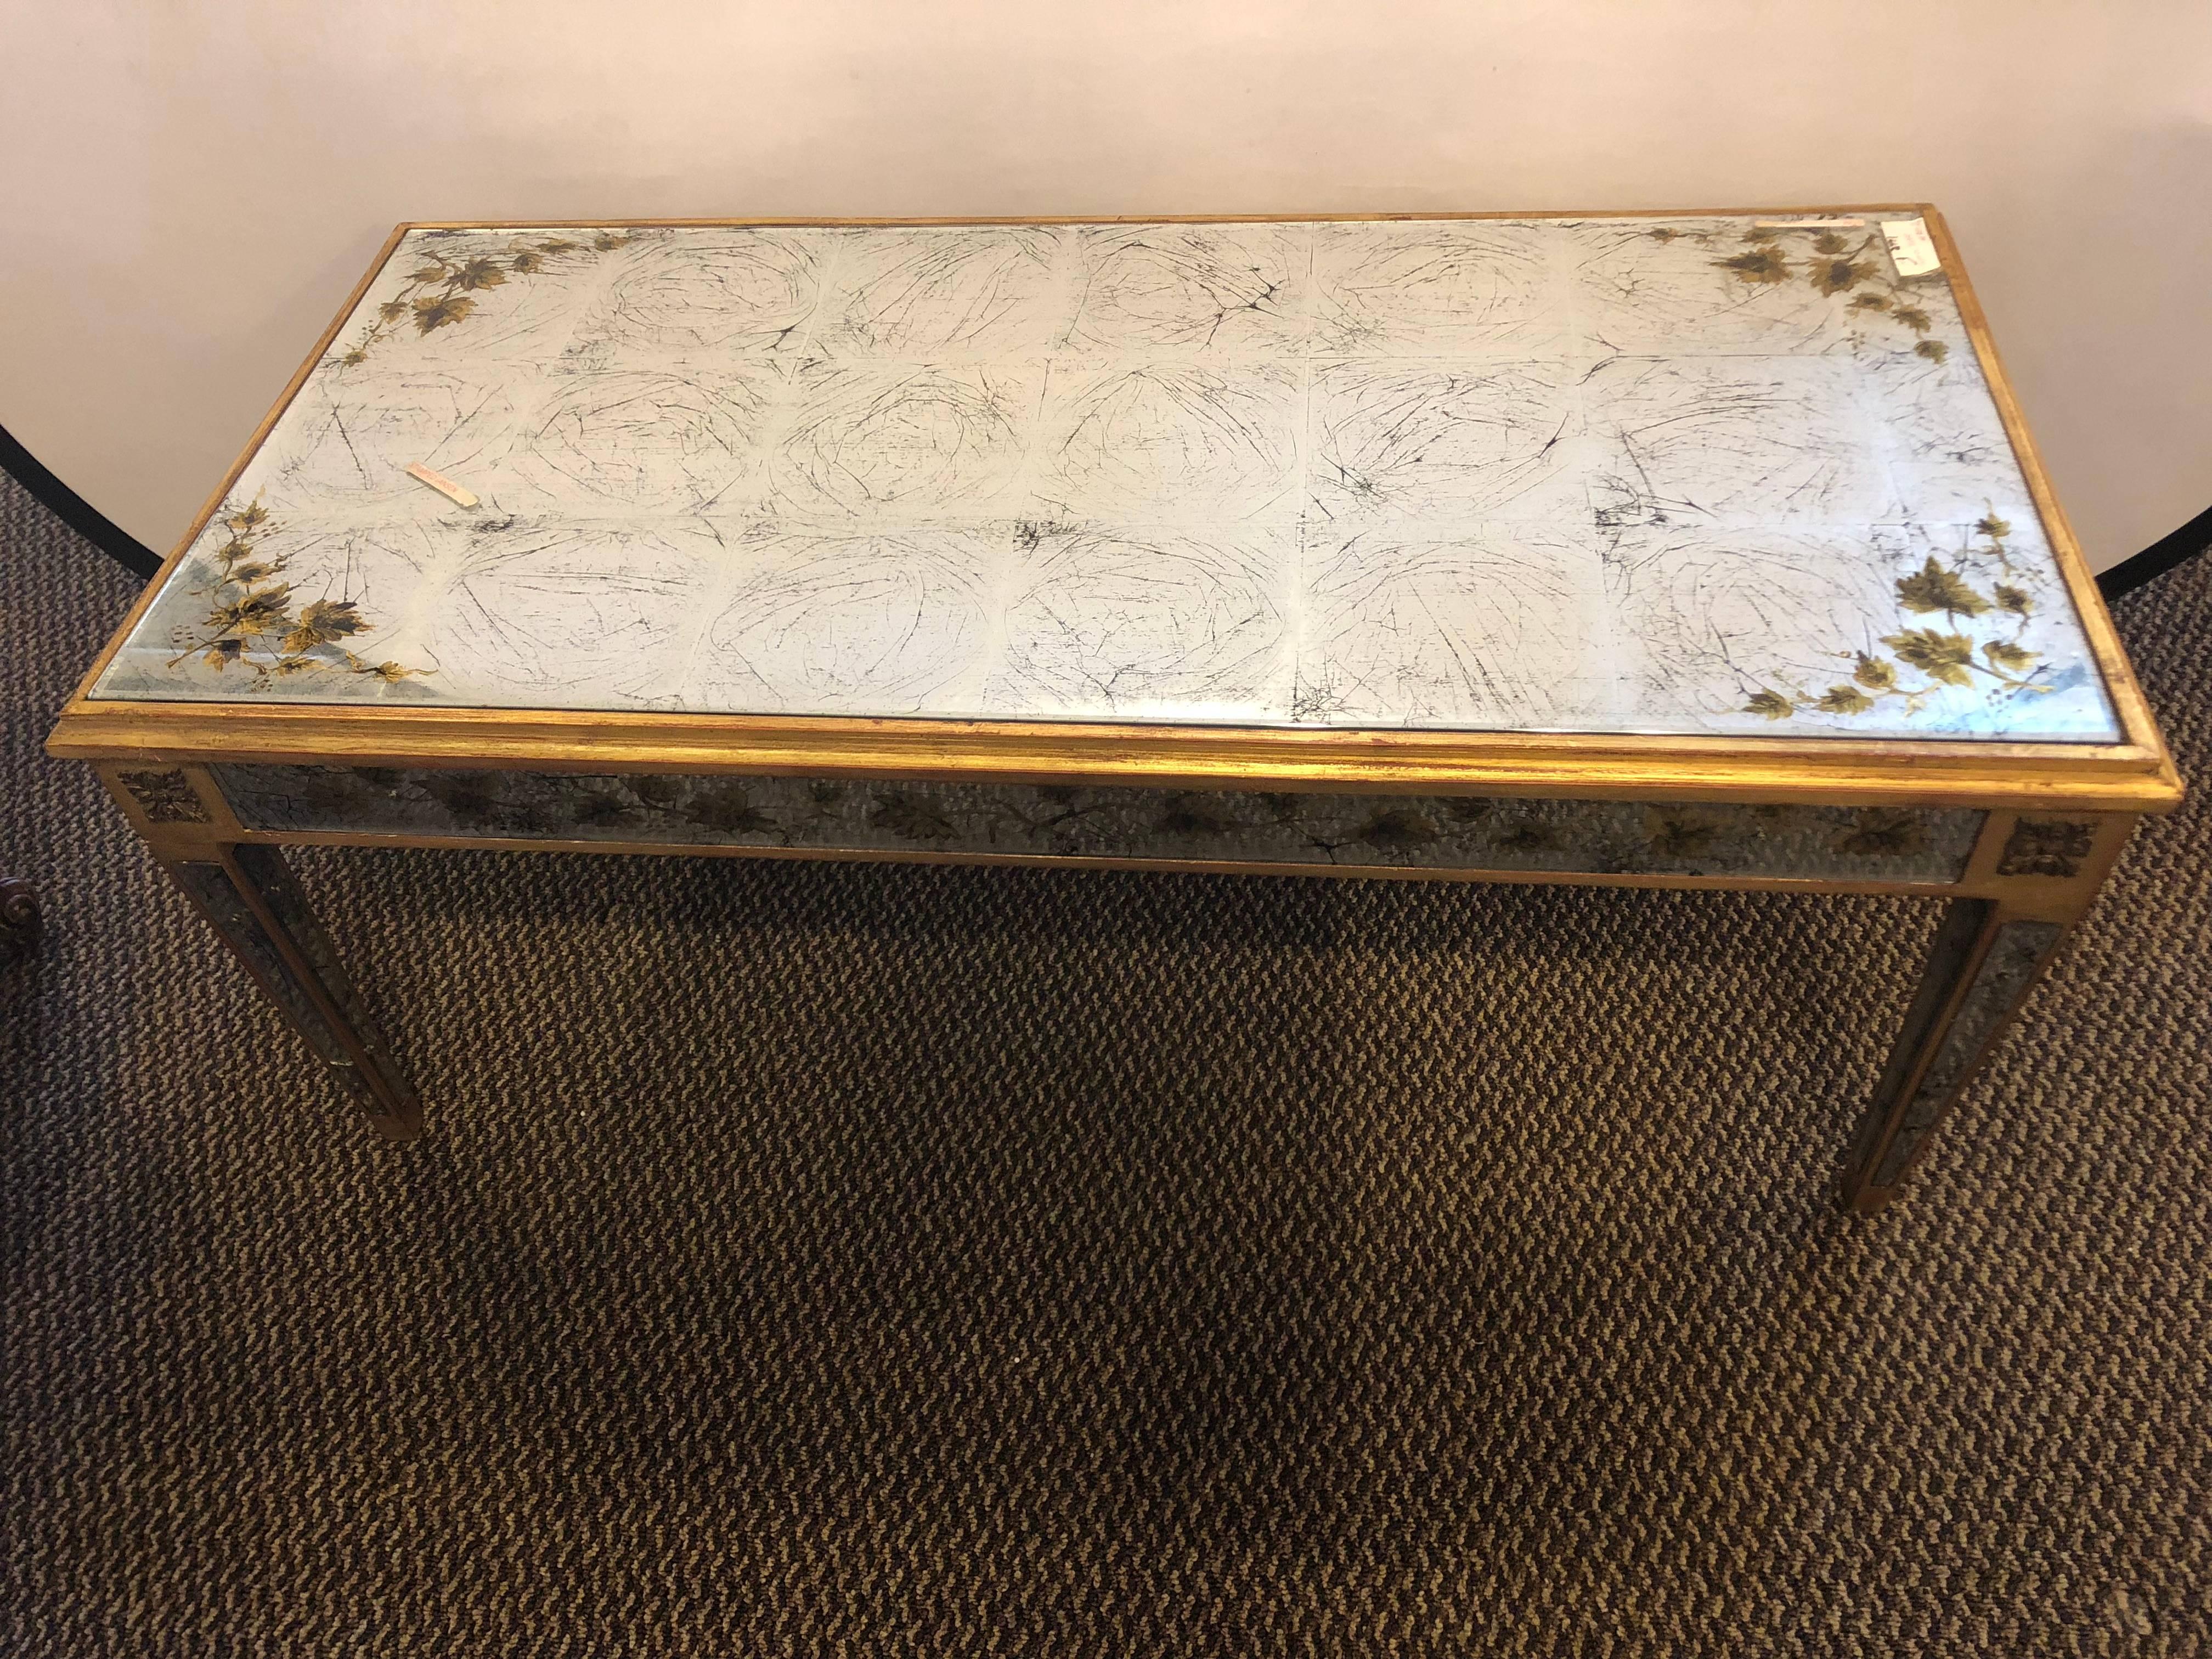 A fabulous Venetian style all-over églomisé glass coffee table with gold-leaf foliate pattern and carved bronze medallions. Stamped Jansen. A similar pair are seen in the James Abbott book on Jansen Furniture.